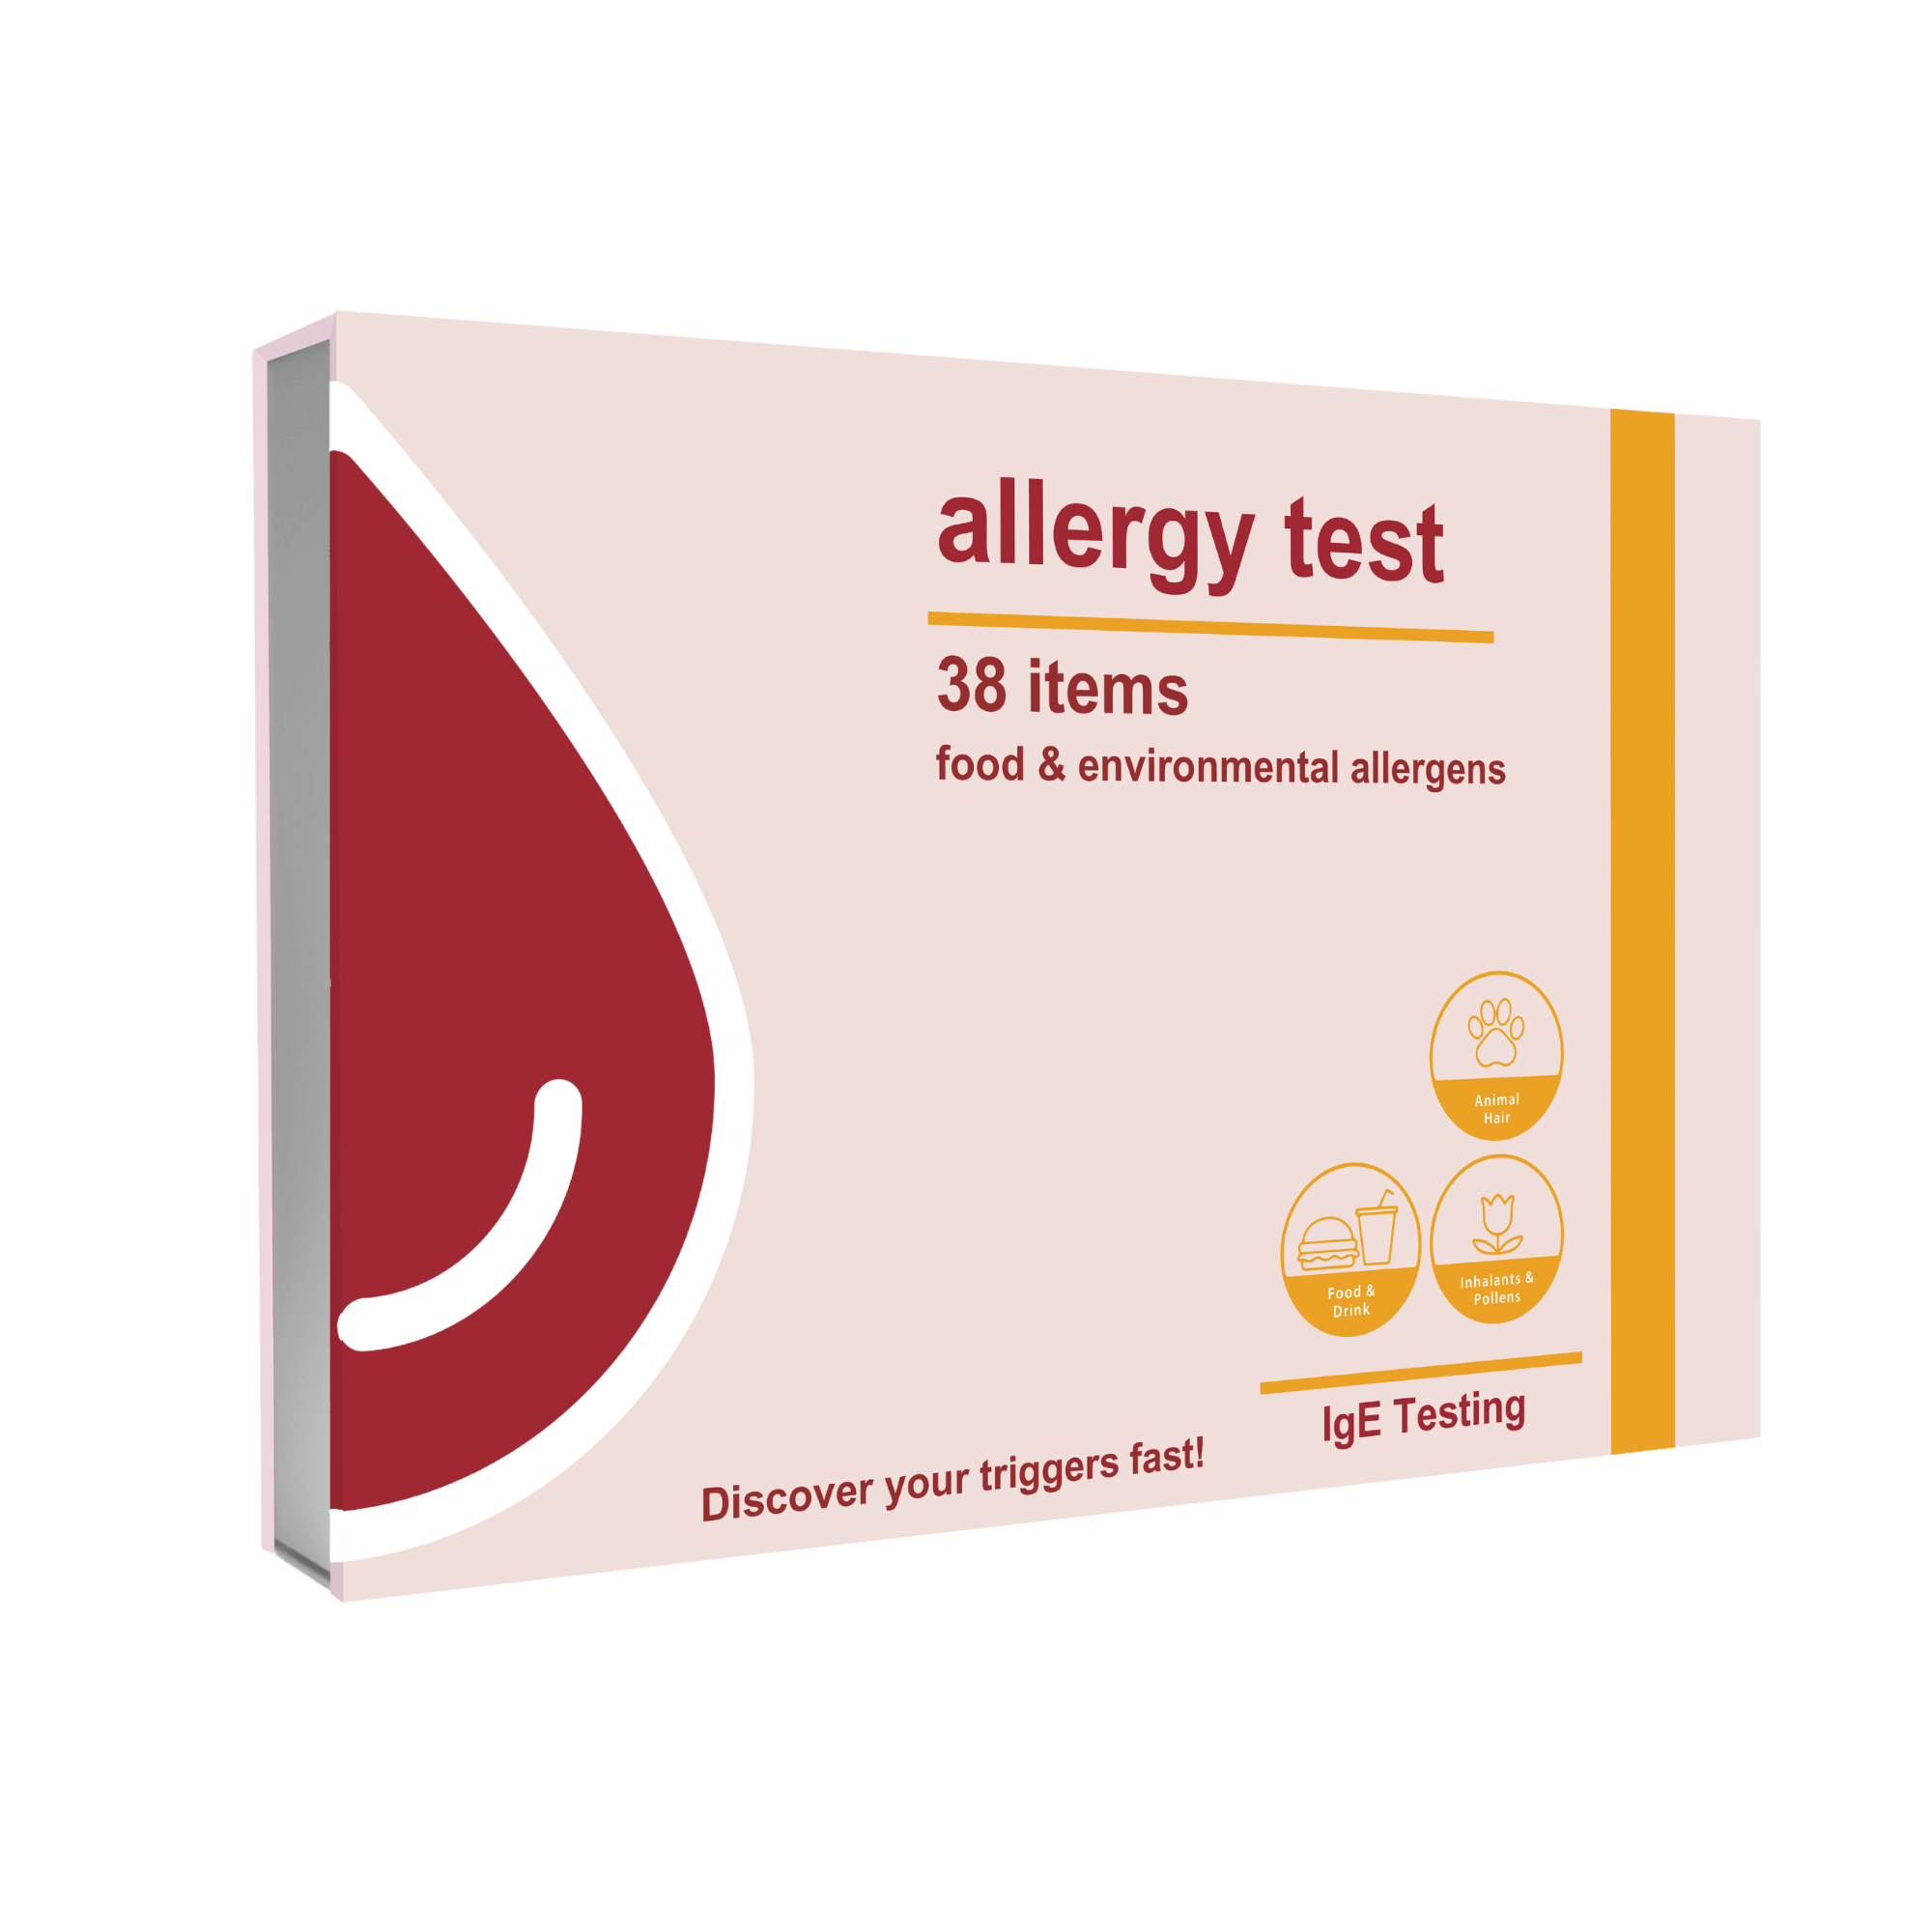 allergy test - Elimination diet following an allergy or intolerance test